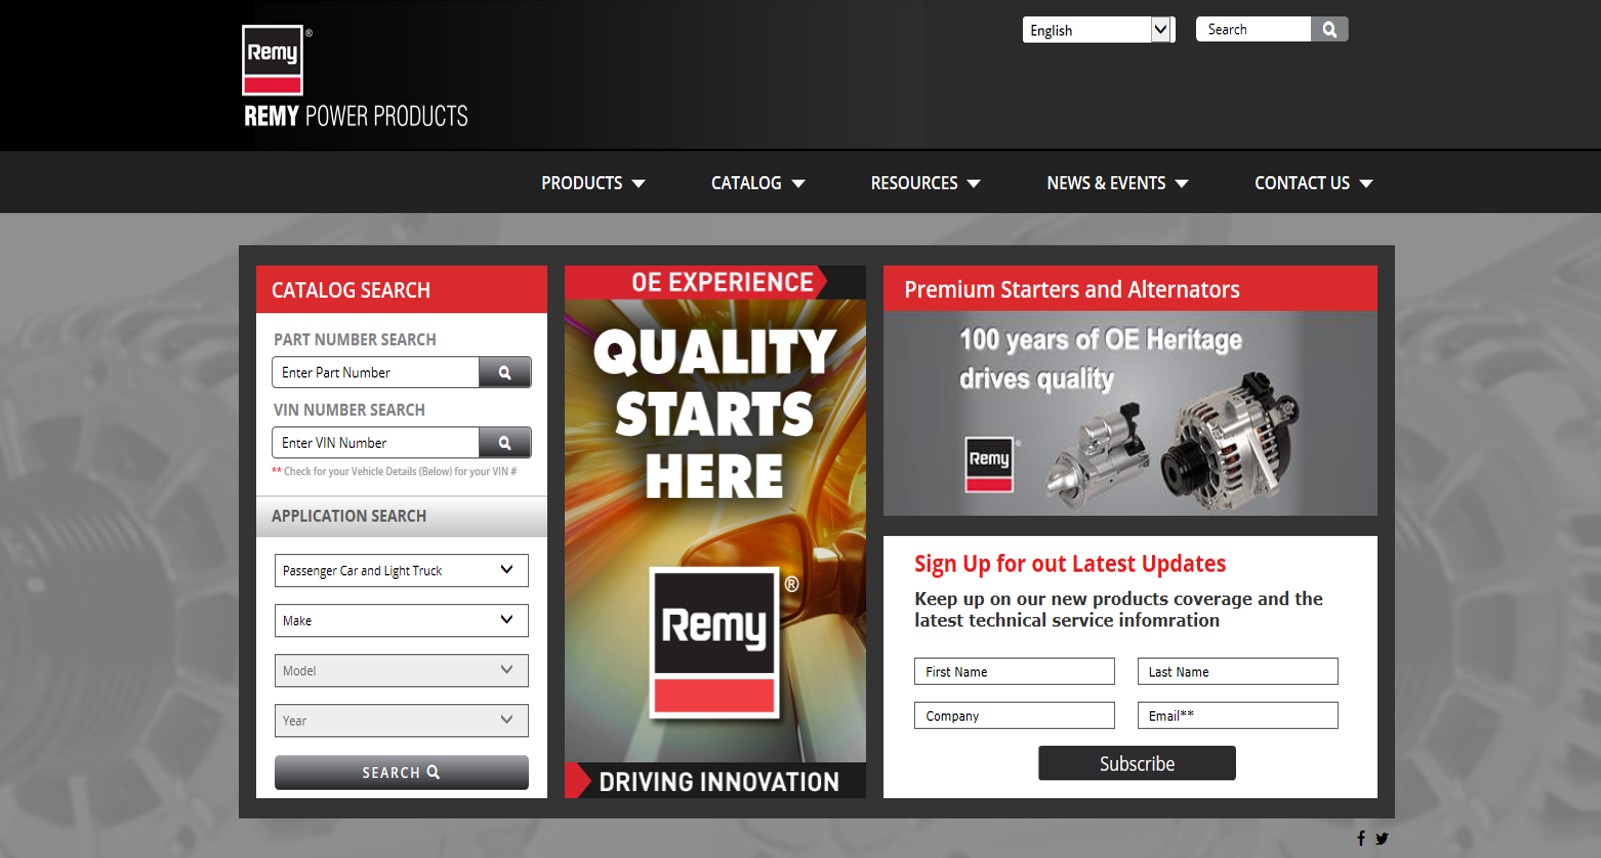 Sign up for latest updates from Remy Power Products